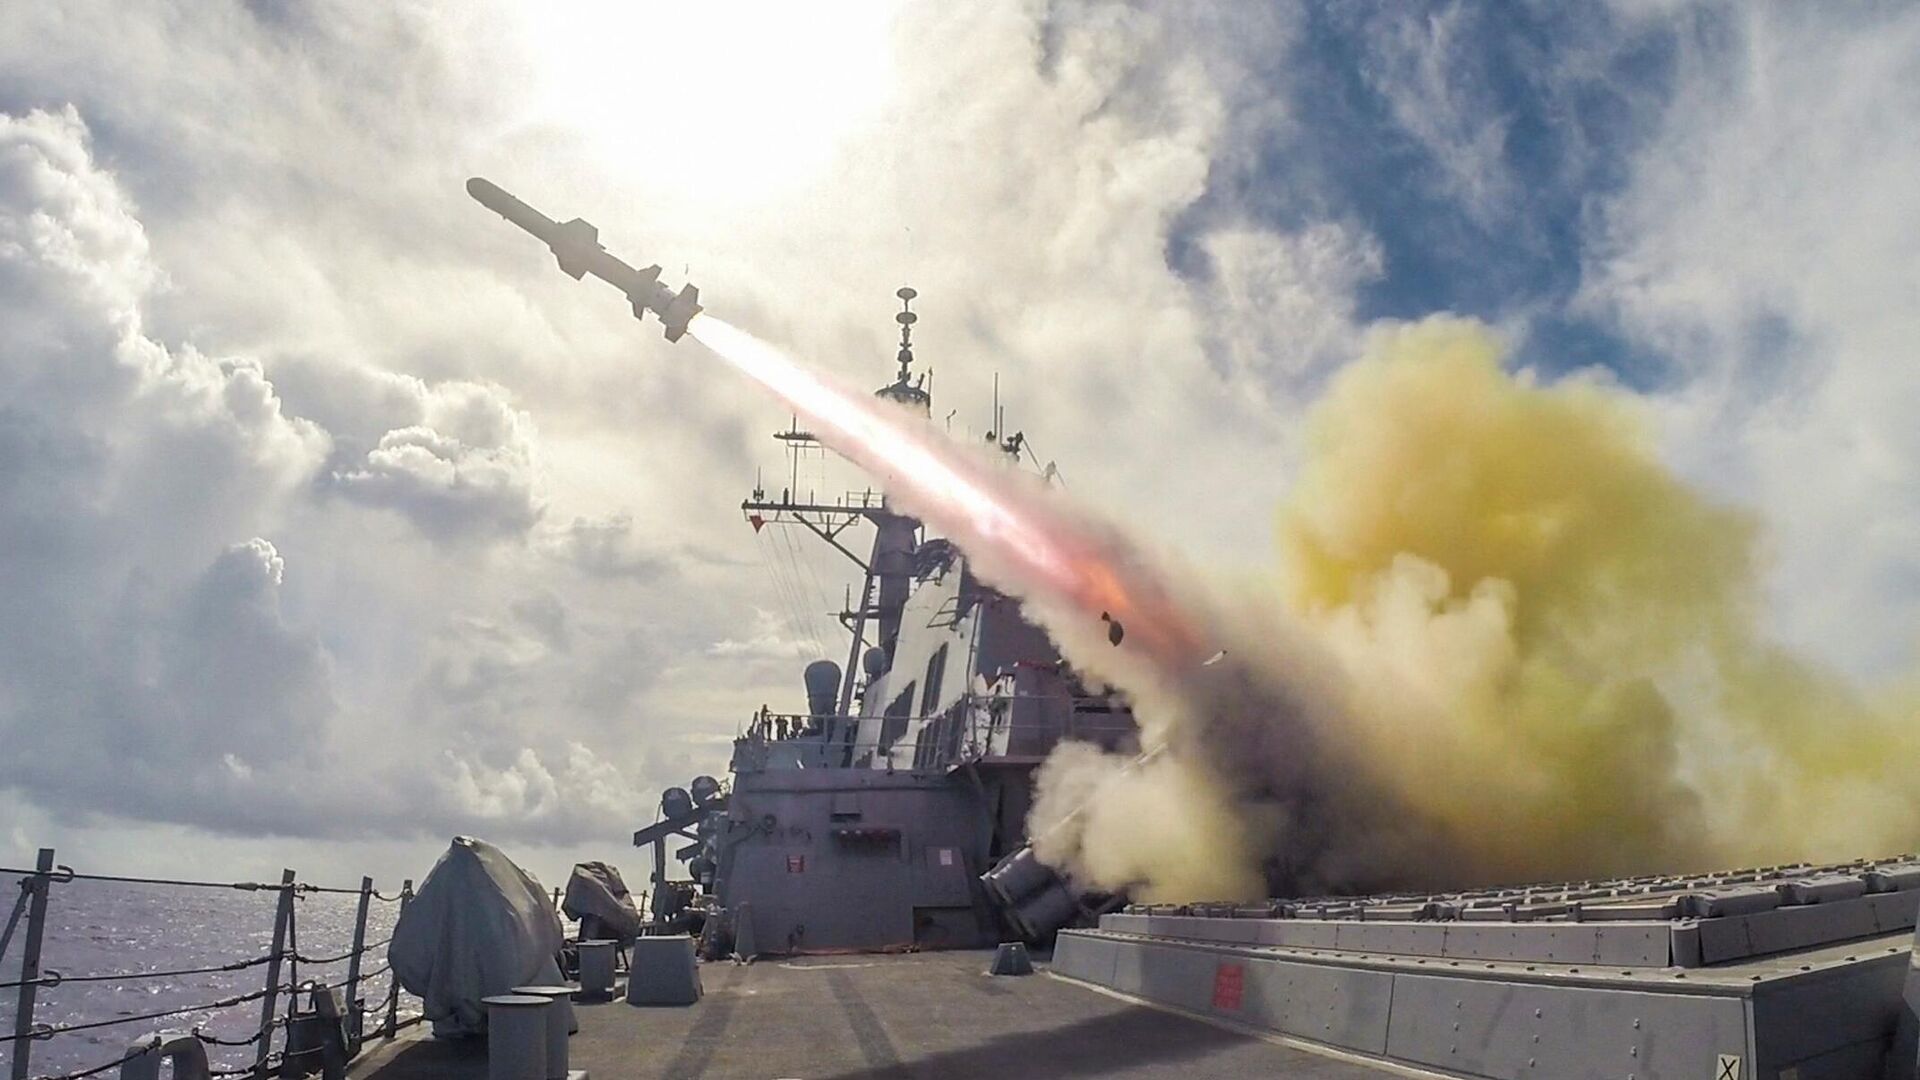 This US Navy photo obtained August 13, 2015 shows the Arleigh Burke-class guided-missile destroyer USS Fitzgerald (DDG 62)as it  fires a Harpoon missile during a live-fire drill on August 12, 2015 in the waters near Guam - Sputnik International, 1920, 03.04.2022